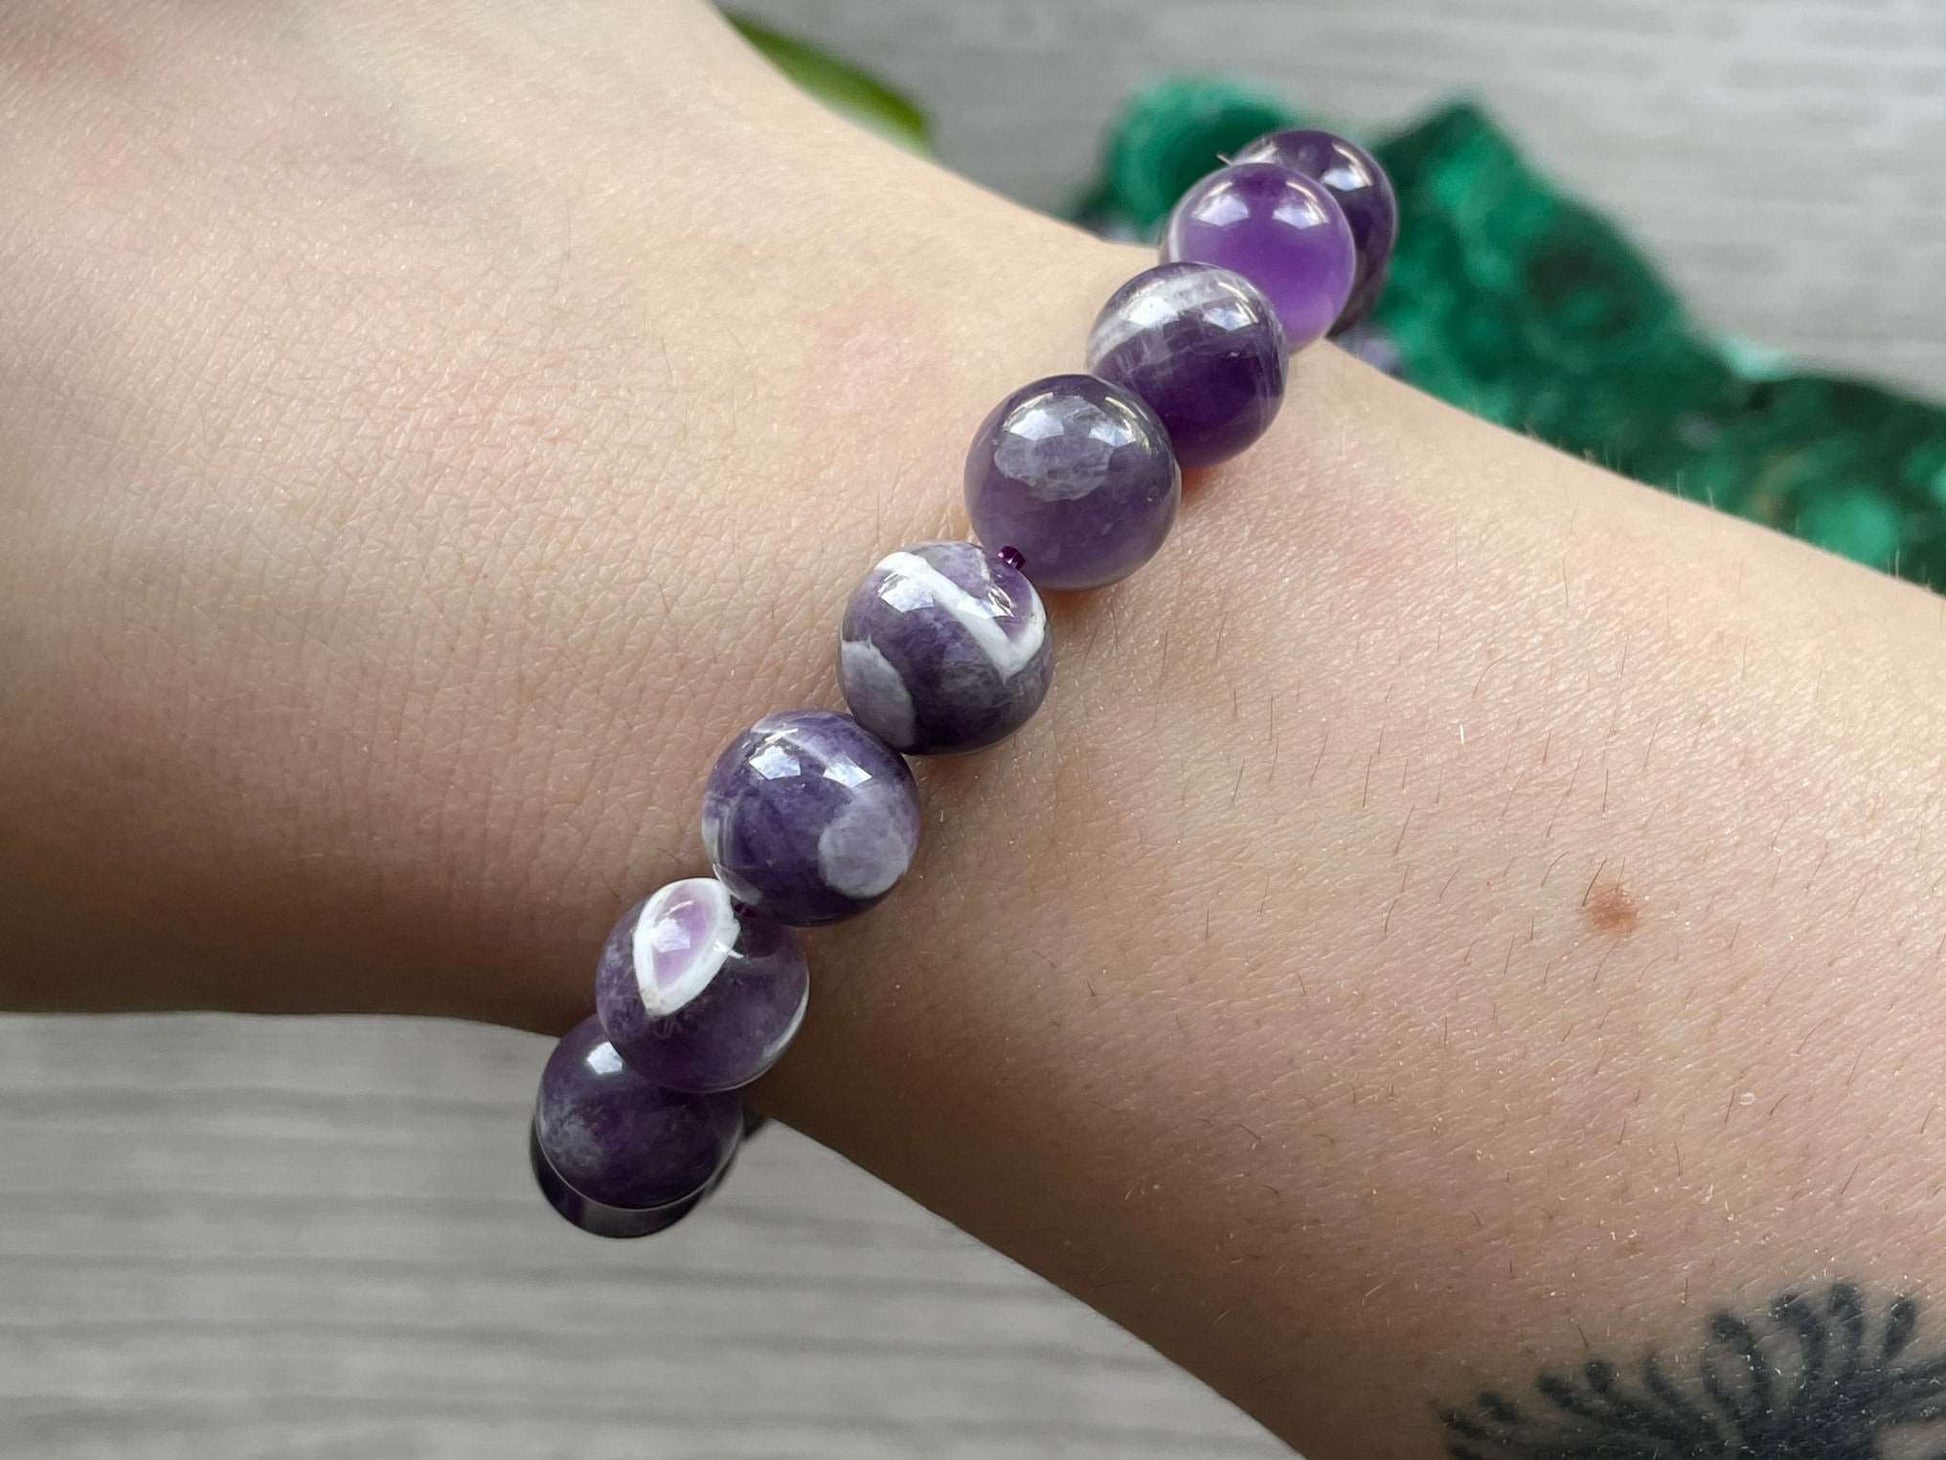 Pictured is a dream amethyst bead bracelet.